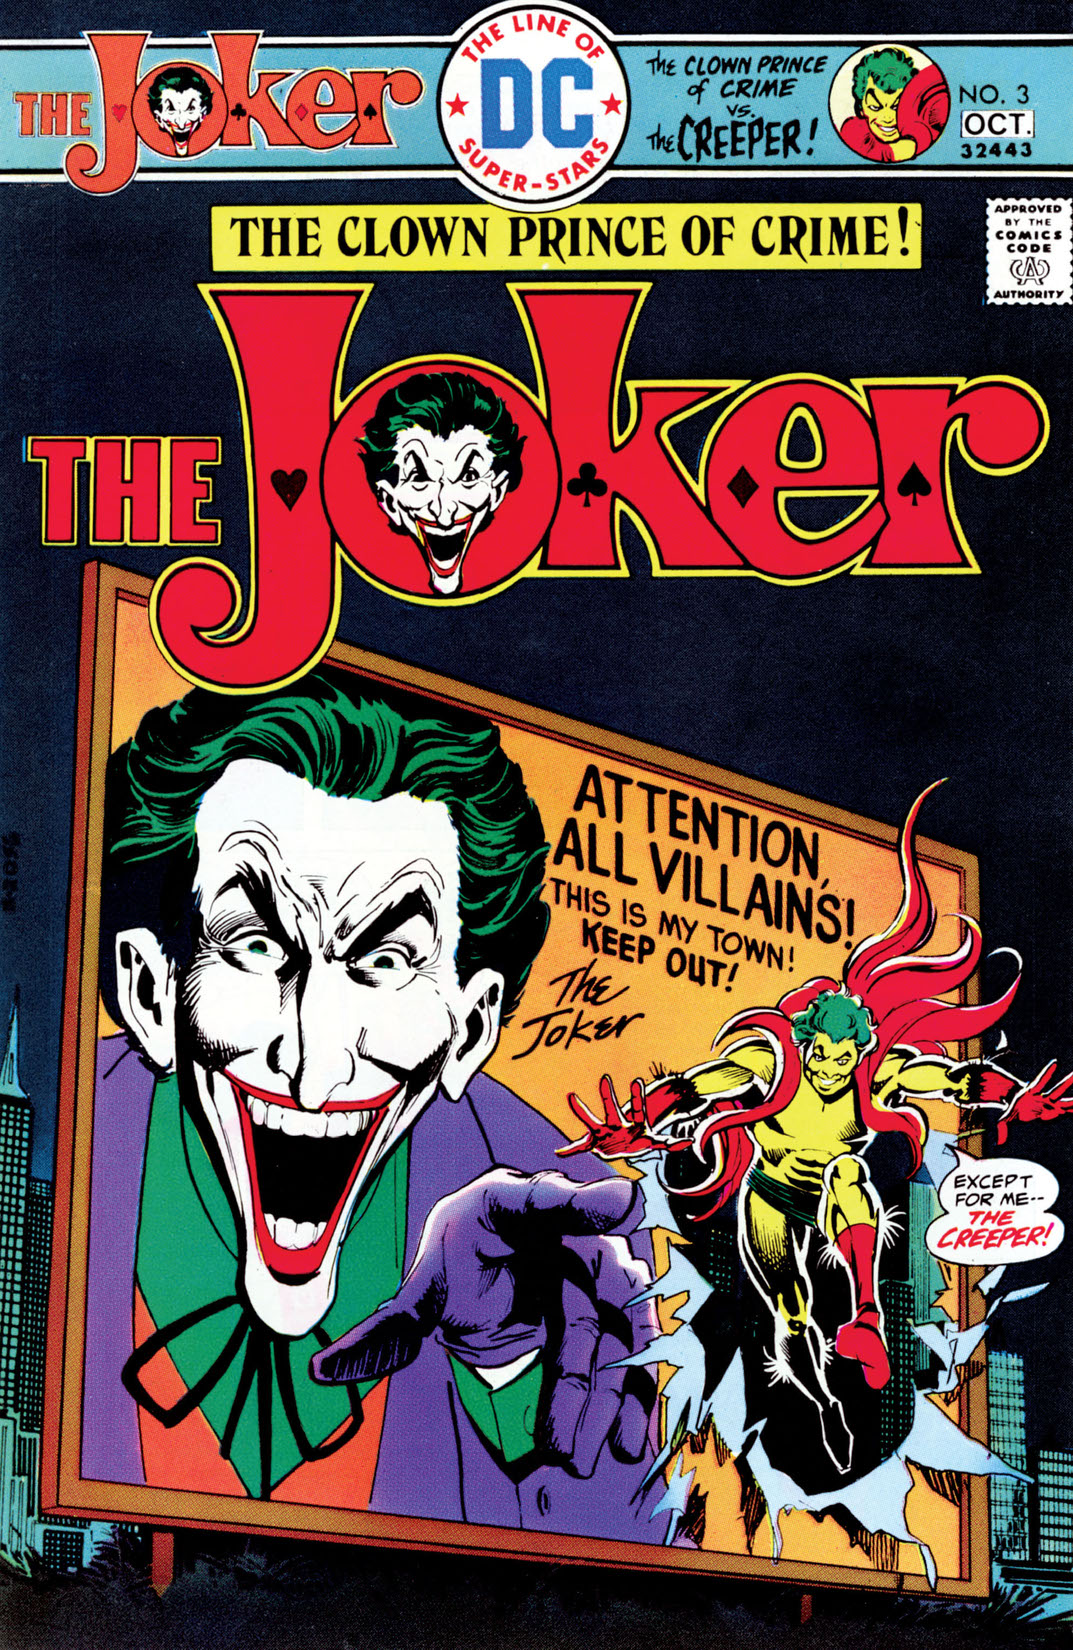 The Joker (1975-) #3 preview images